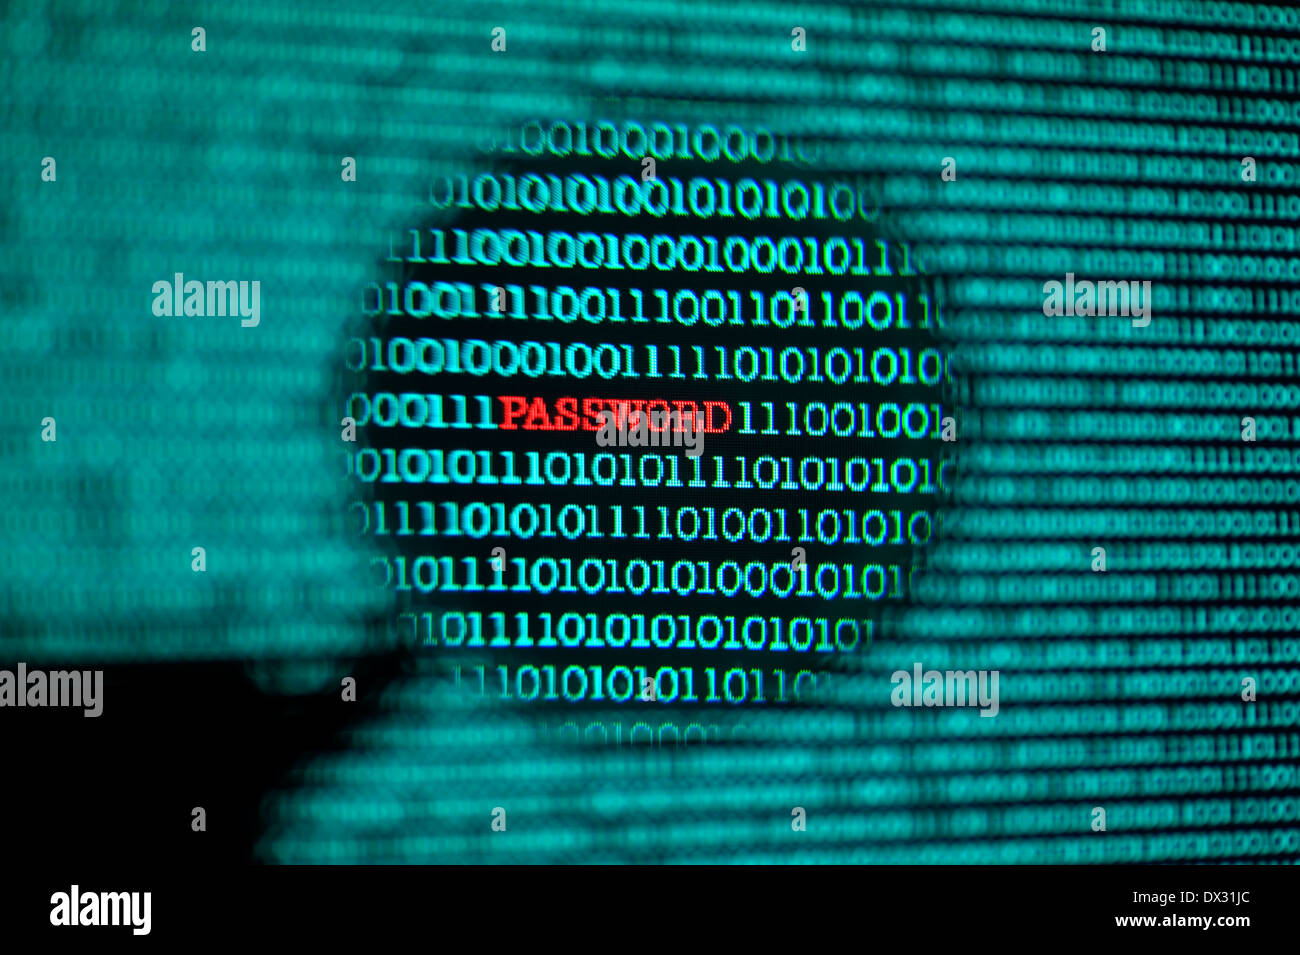 cyber crime password computer security Stock Photo